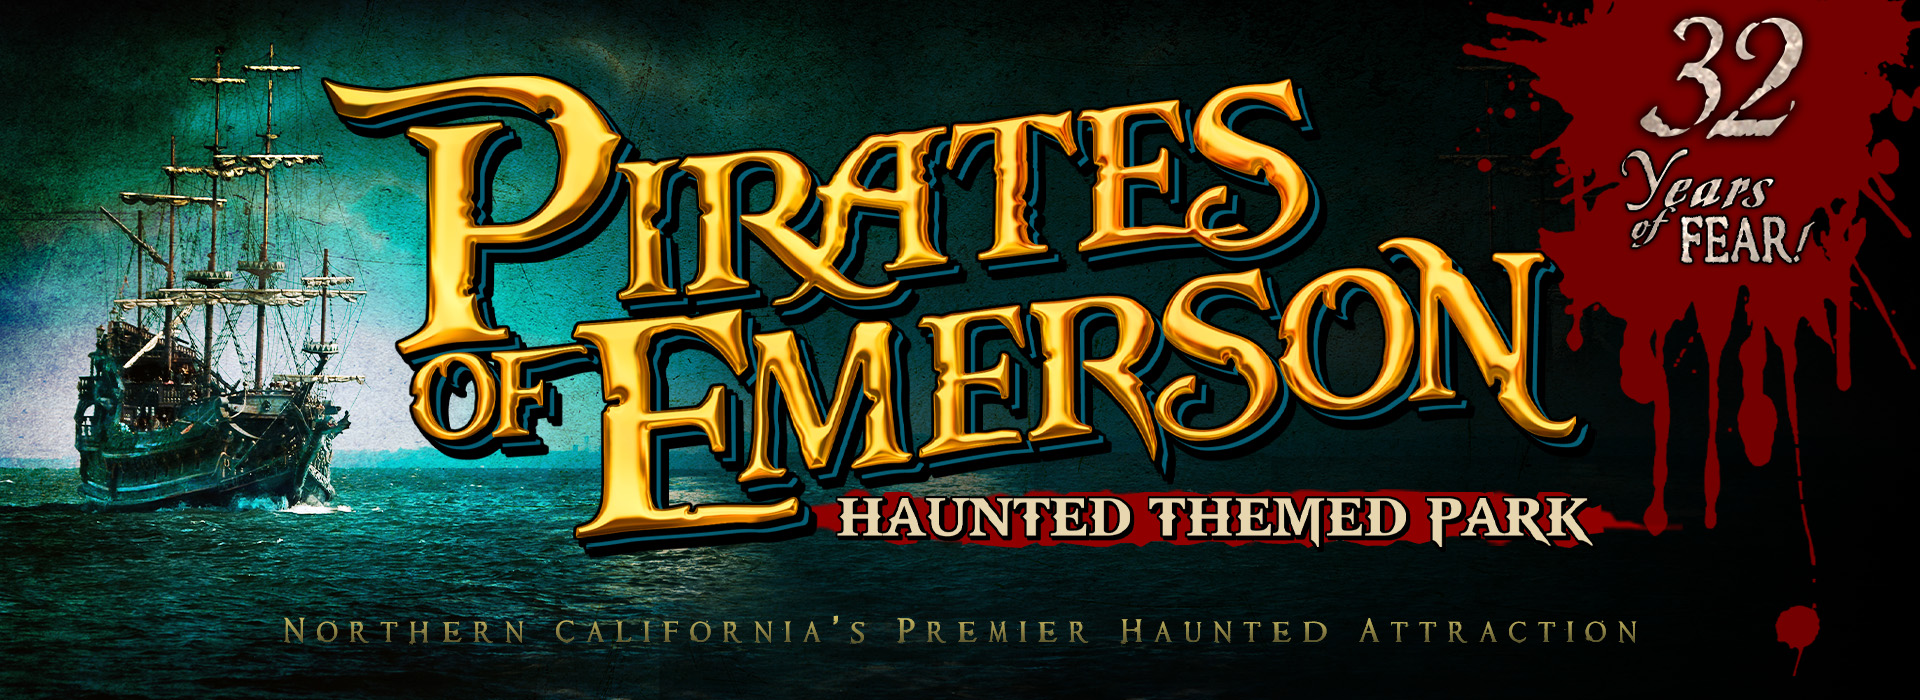 Pirates of Emerson Haunted Theme Park (Sep 27-29)